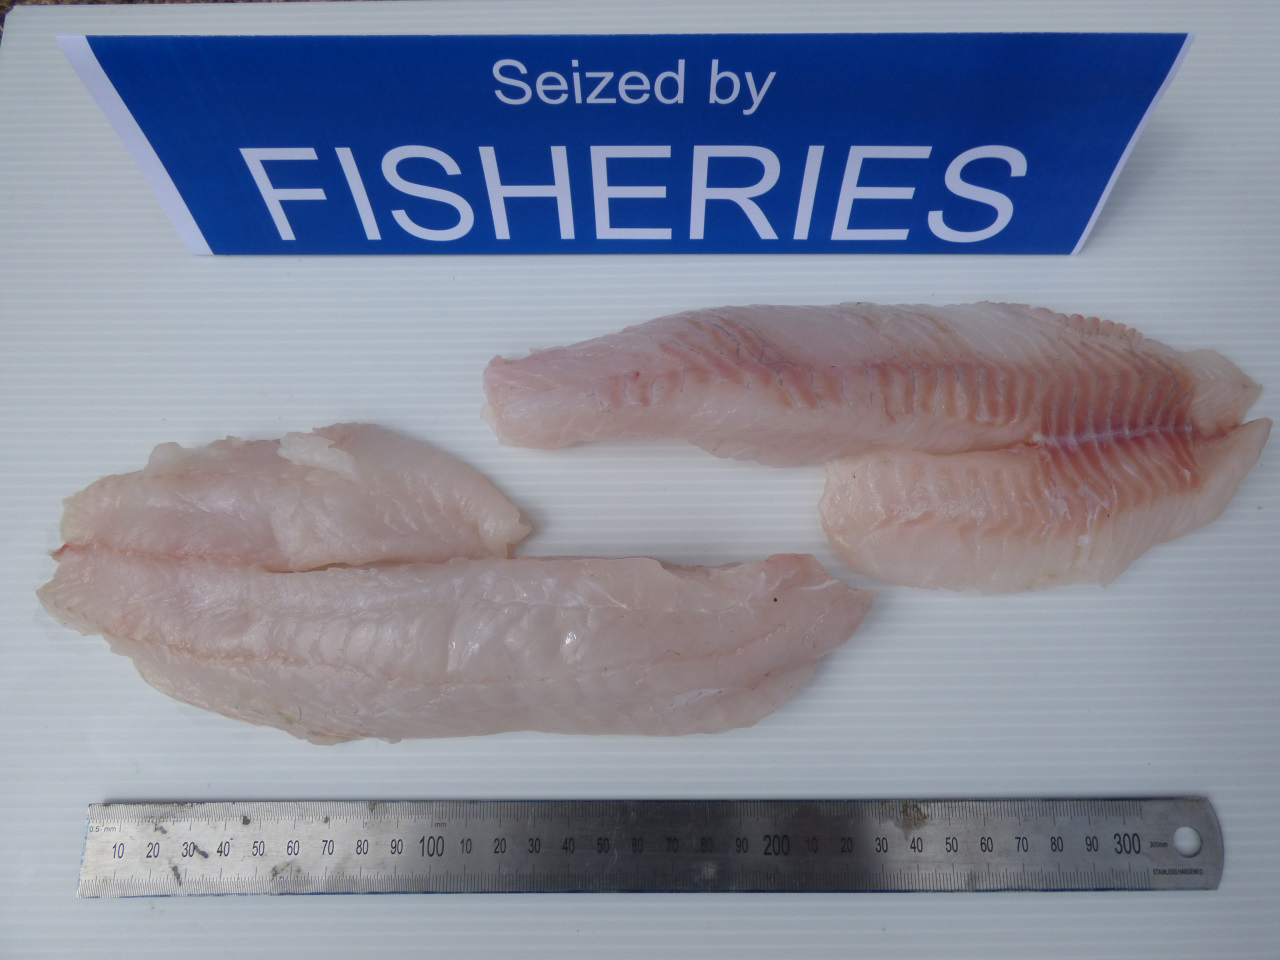 Eastern Freshwater Cod fillets seized by Fisheries